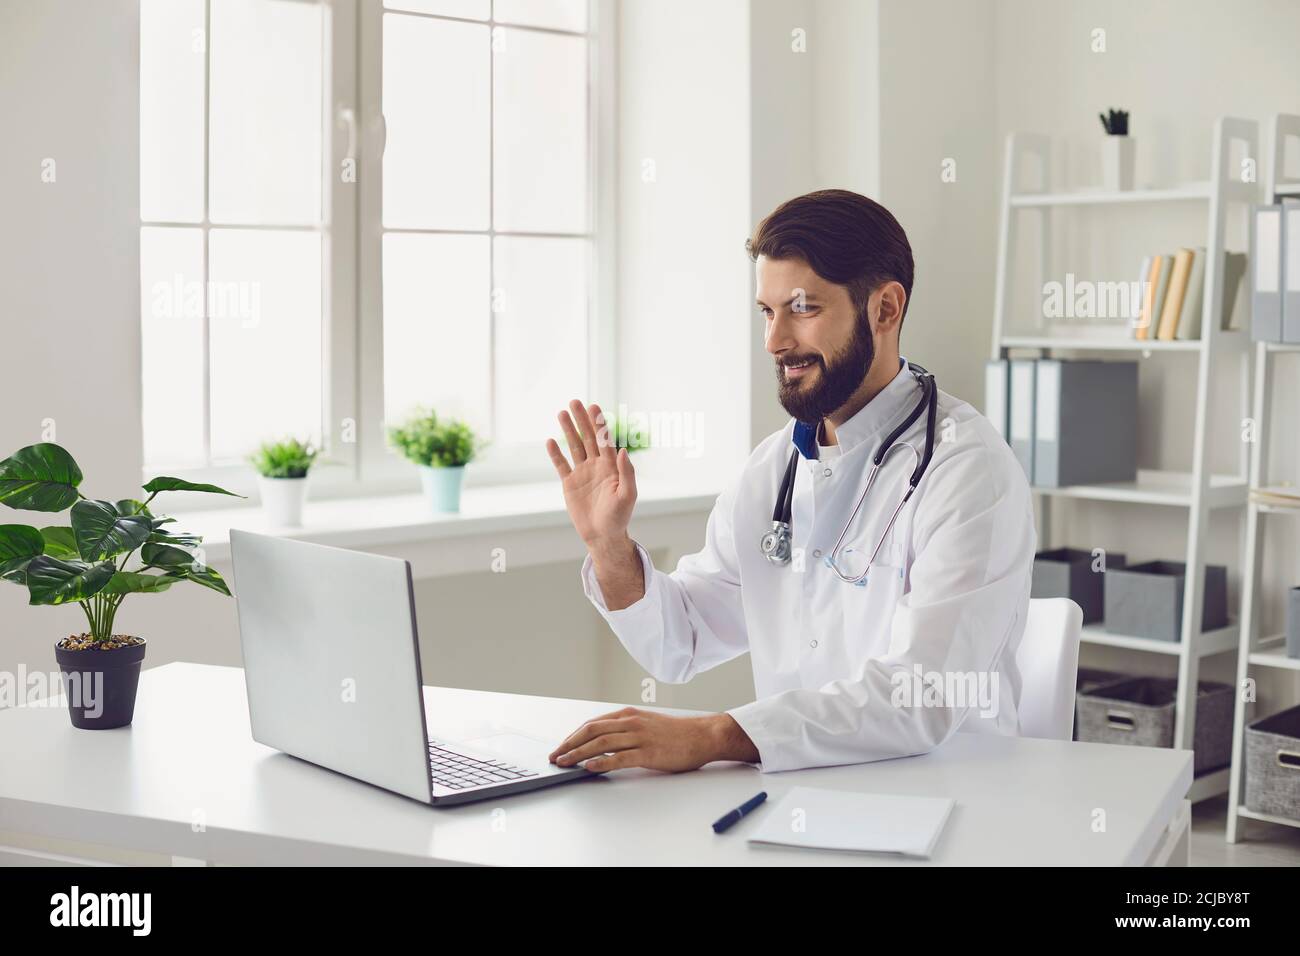 Medical and medicine. Online doctor consultation. Stock Photo